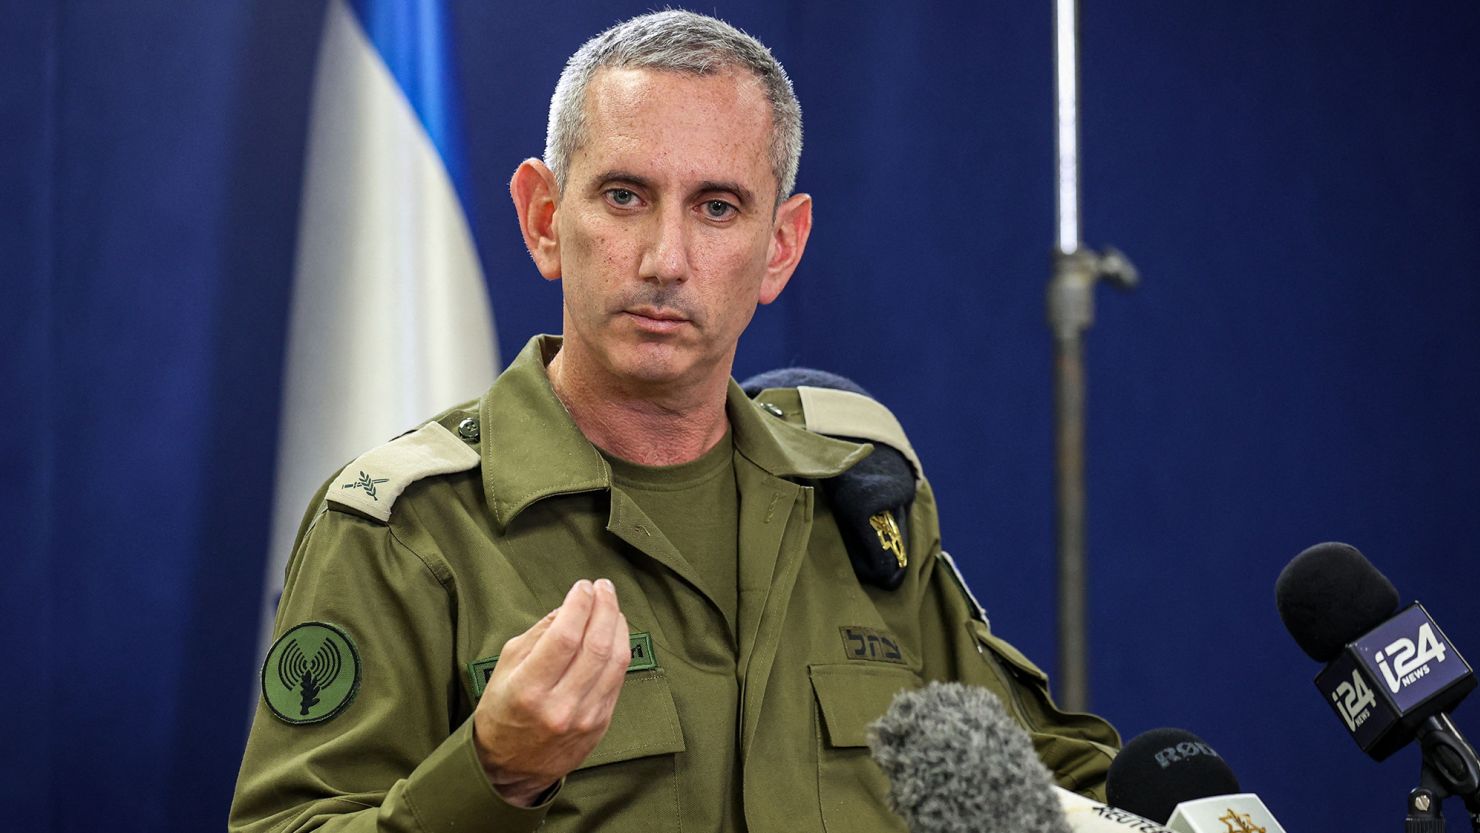 Israeli army spokesman Rear Admiral Daniel Hagari speaks to the press from The Kirya, which houses the Israeli Ministry of Defence, in Tel Aviv on October 18, 2023. A blast ripped through a hospital in war-torn Gaza killing hundreds of people late on October 17, sparking global condemnation and angry protests around the Muslim world. Spokesman Hagari on October 18 said that Israel had "evidence" that militants were responsible for the blast that killed hundreds at a Gaza hospital, saying a review proved others were at fault. (Photo by GIL COHEN-MAGEN / AFP) (Photo by GIL COHEN-MAGEN/AFP via Getty Images)